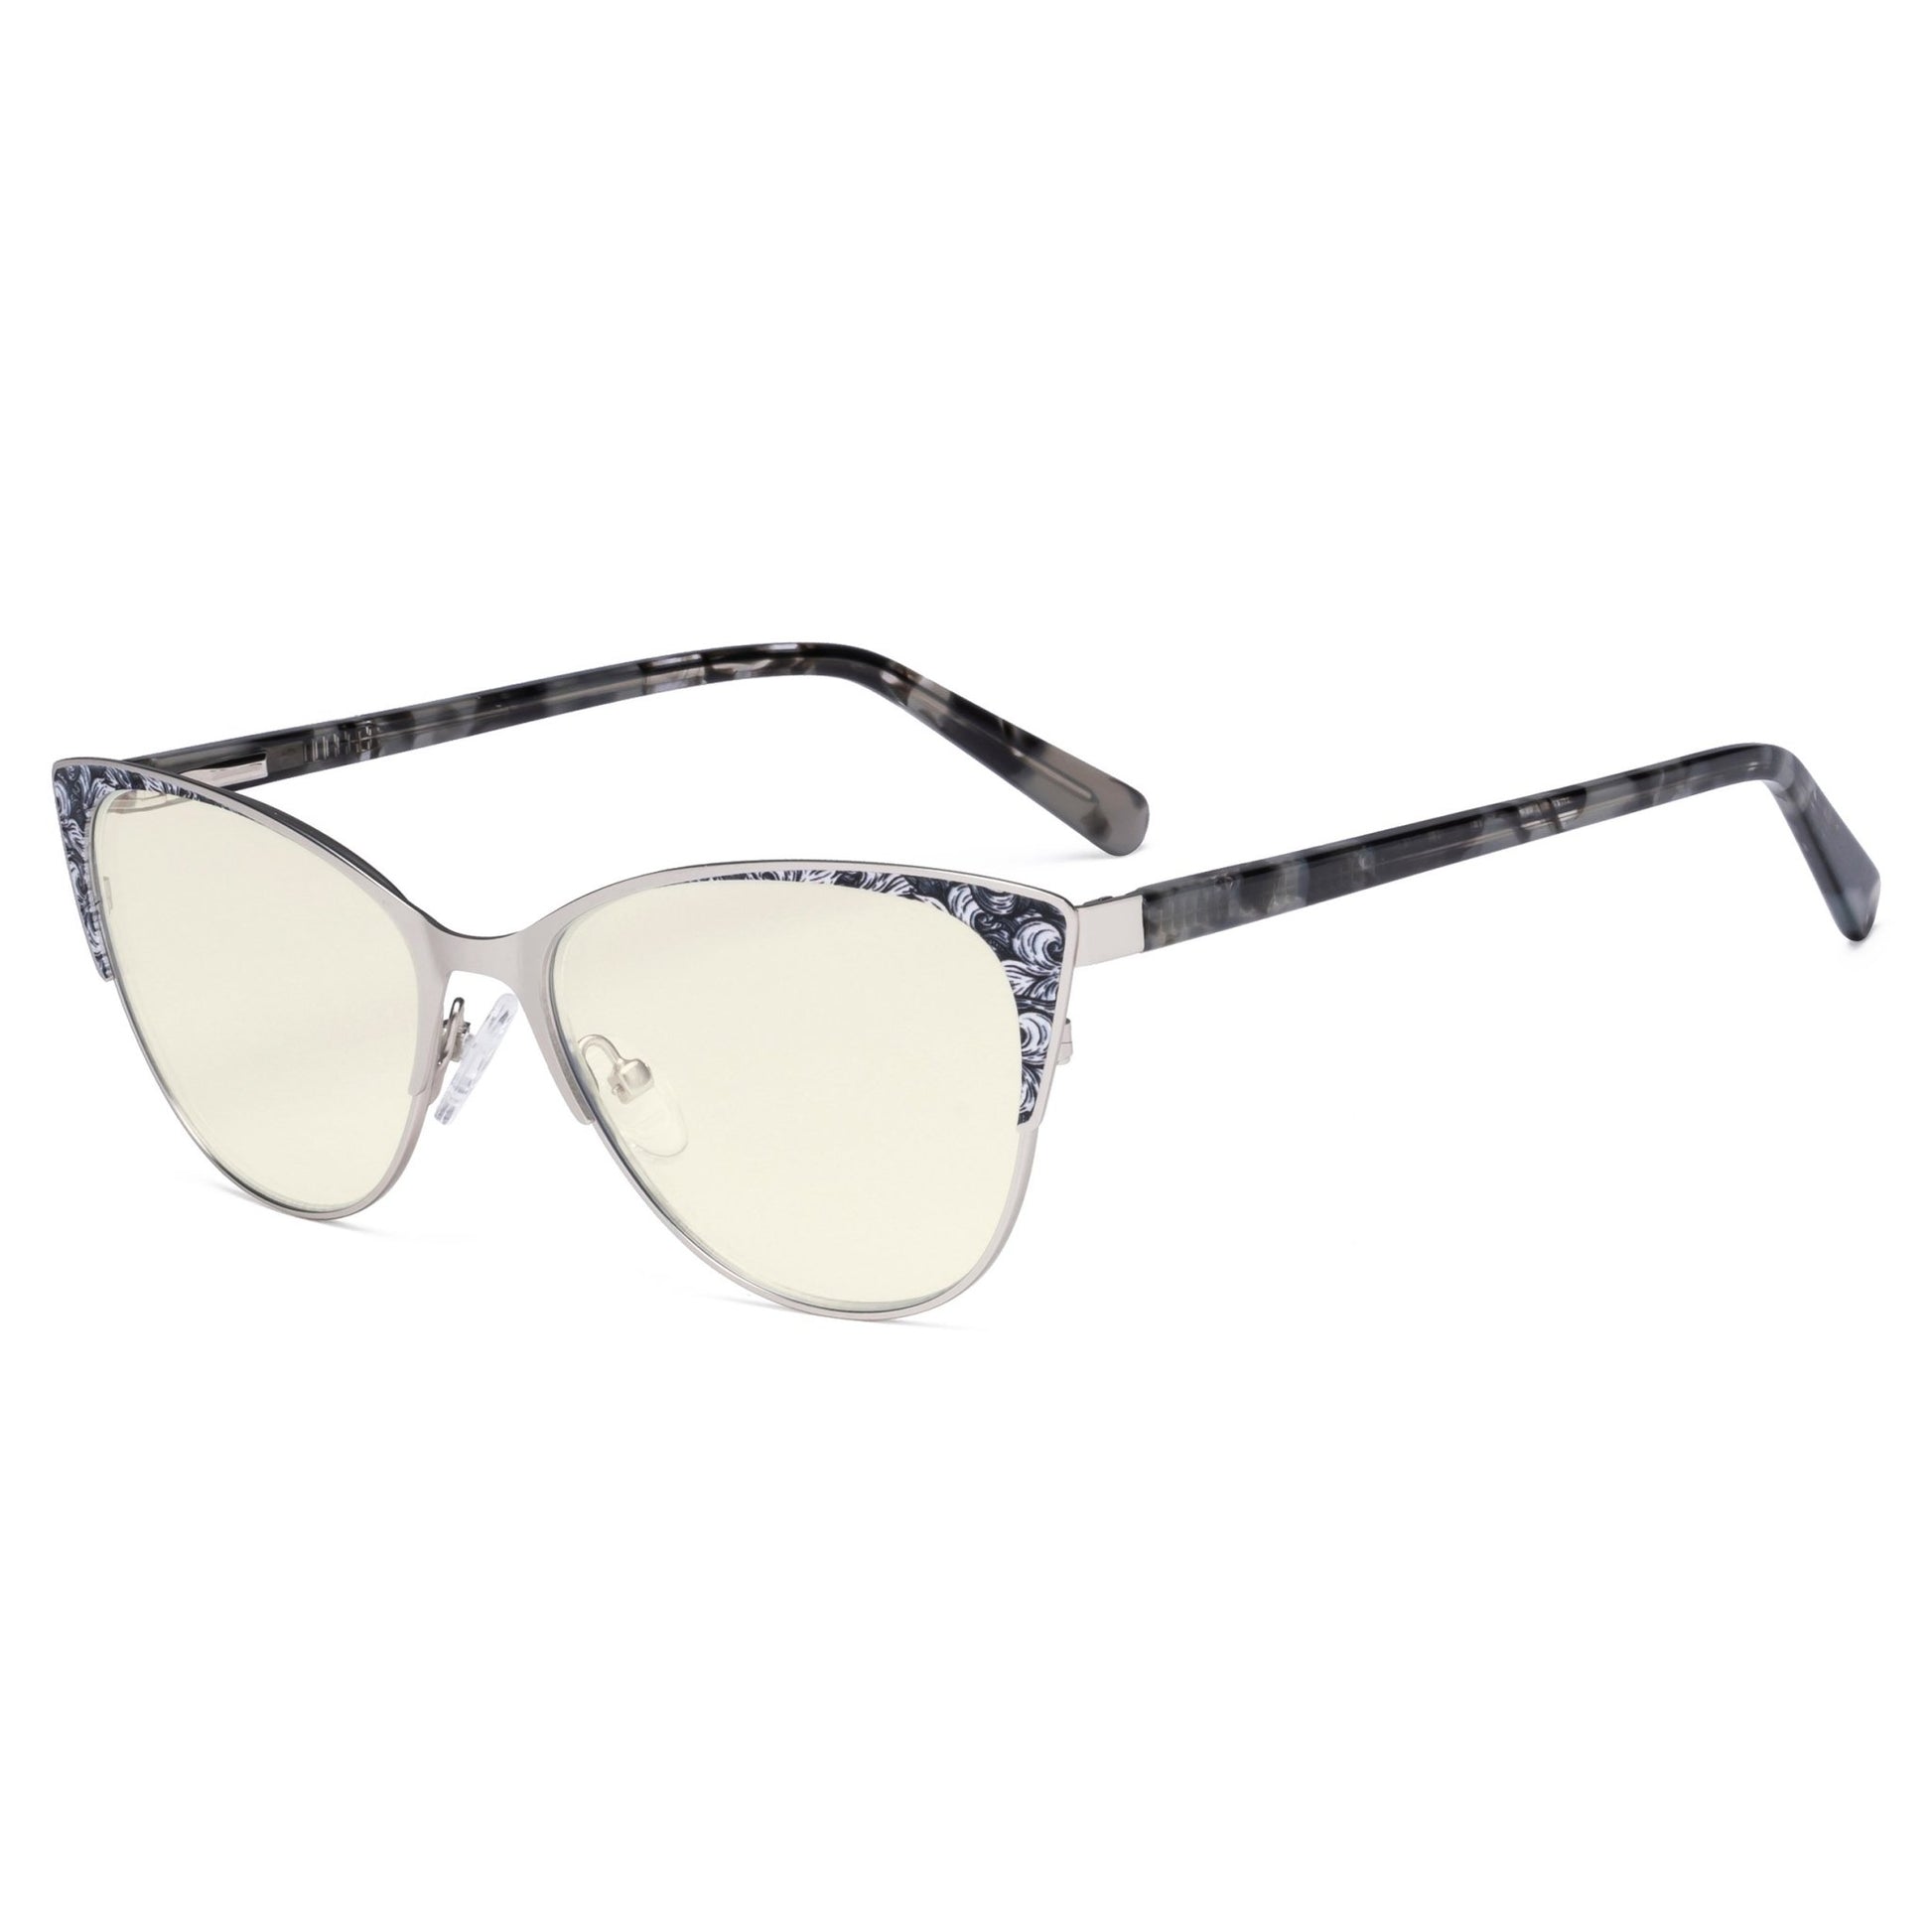 Butterfly Design Computer Eyeglasses Silver LX19044-BB40